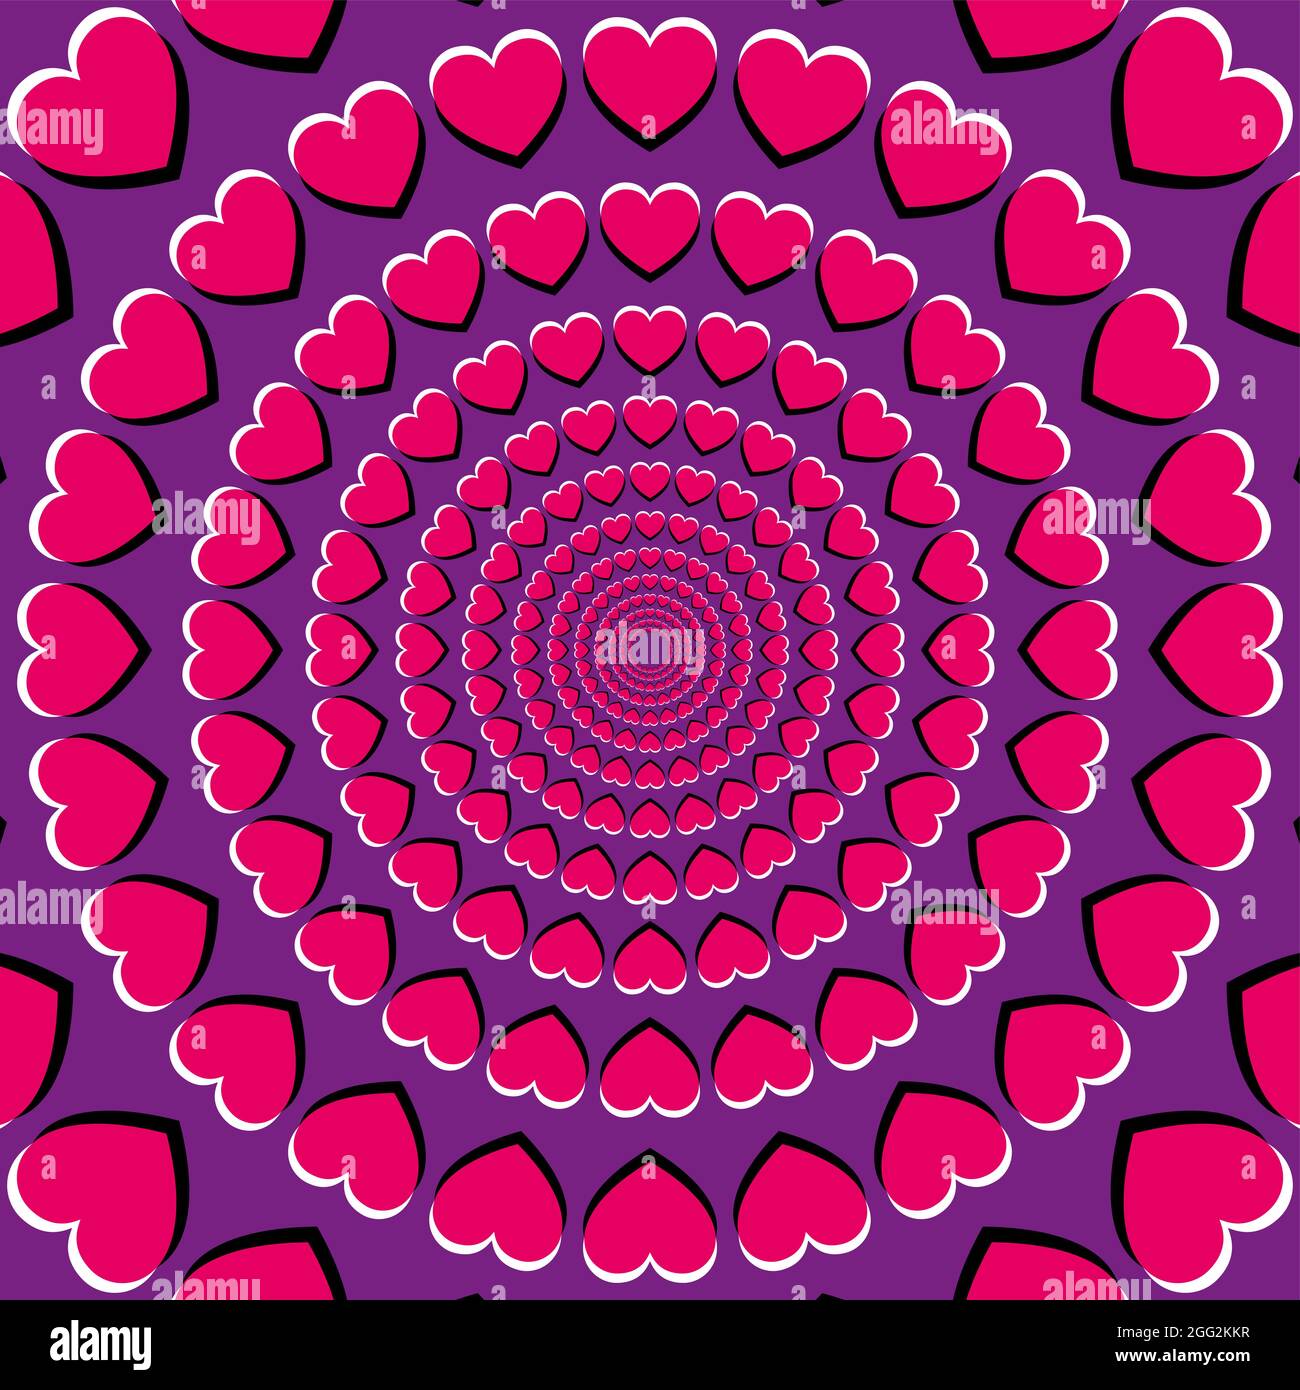 Motion illusion with heart symbols. Peripheral drift illusion, made of pink hearts on a purple background. It seems the hearts are moving and drifting. Stock Photo